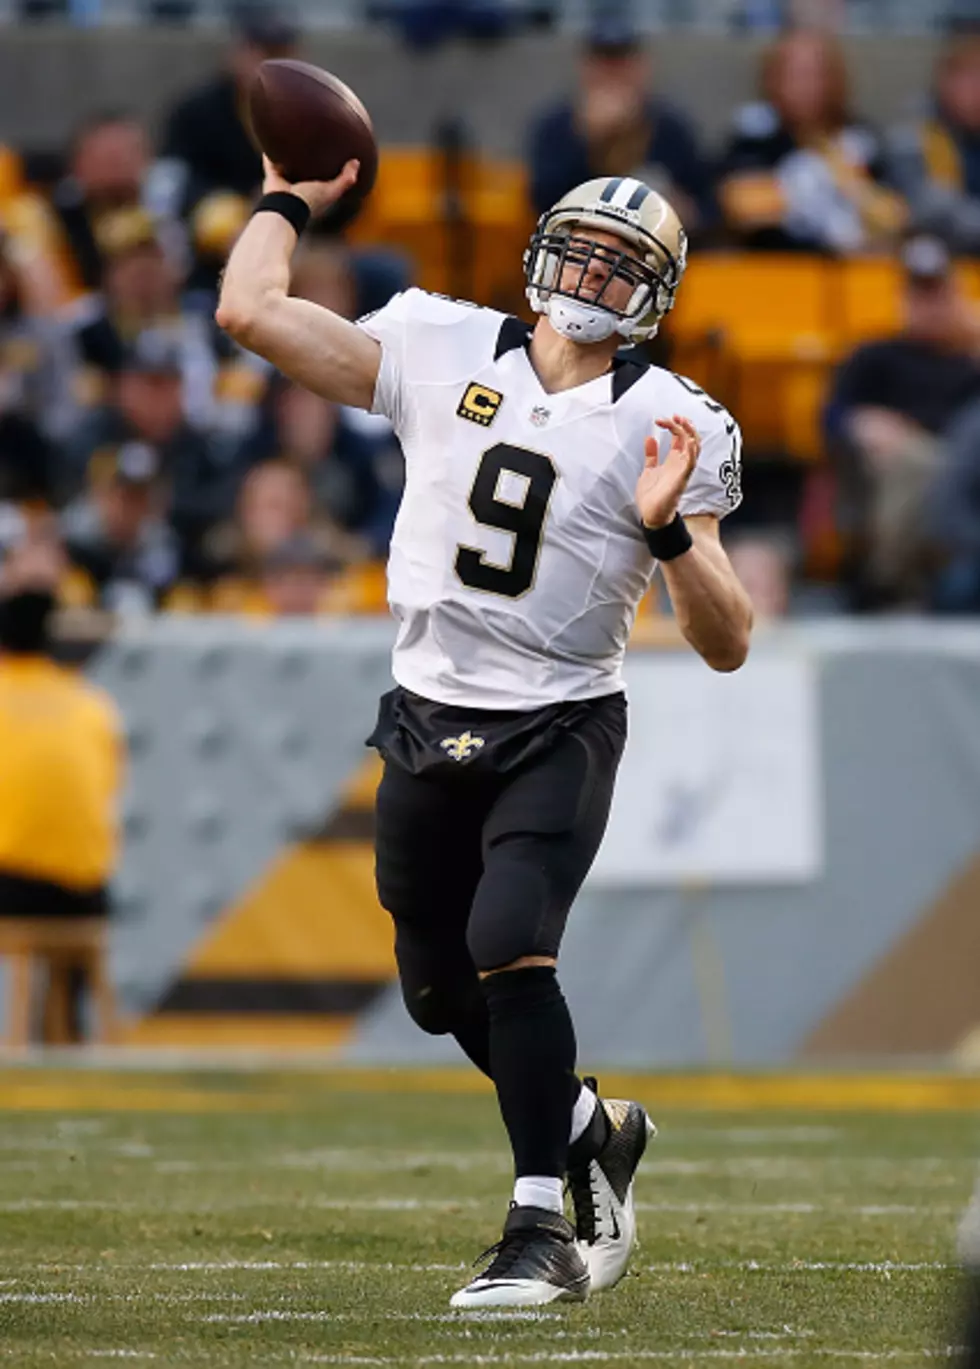 Drew Brees Named NFC Offensive Player Of The Week